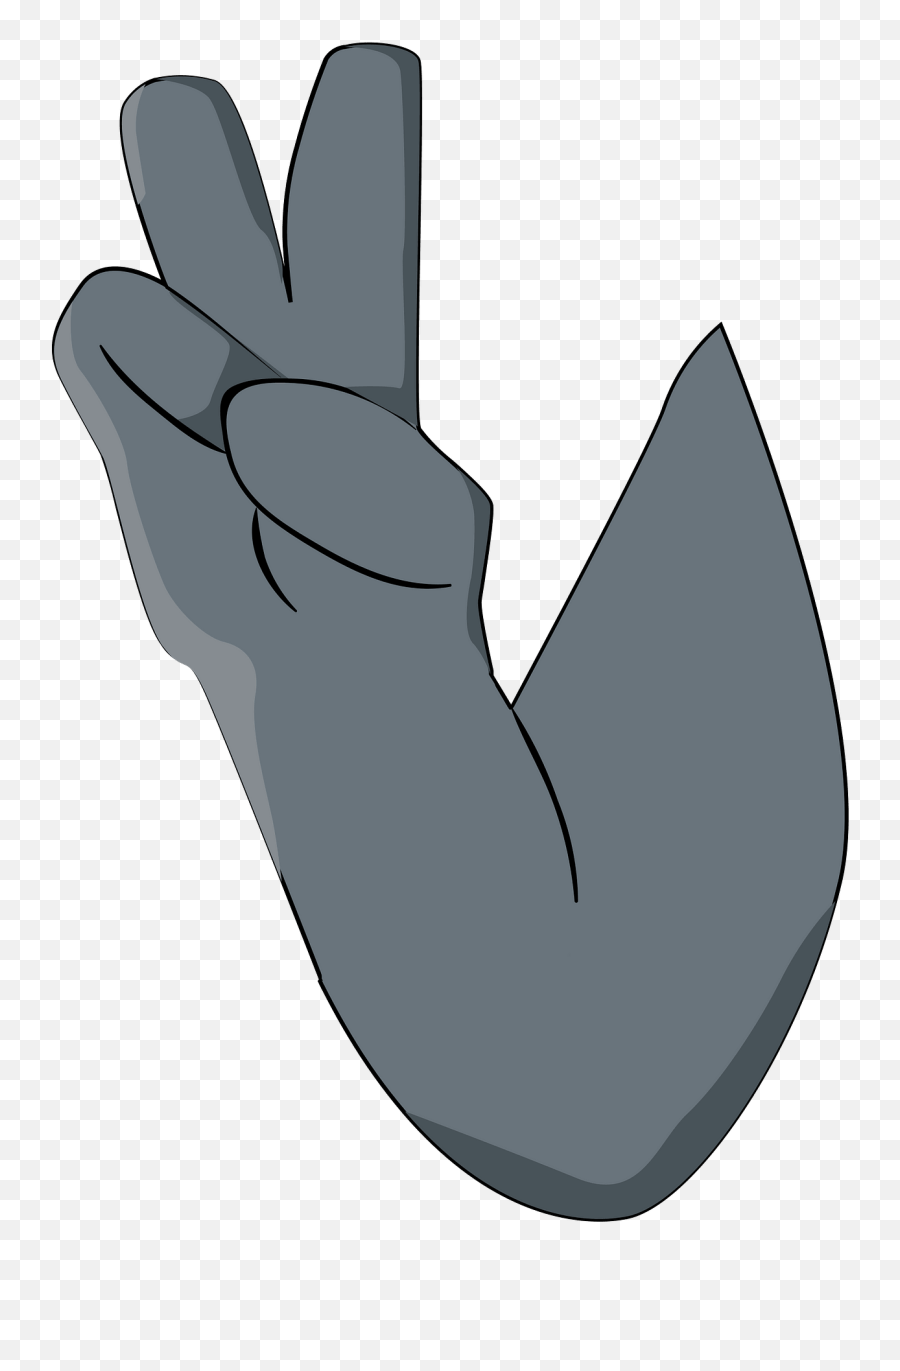 Wolf Hand In Peaceful Gesture Clipart Free Download Emoji,Body Language Clipart